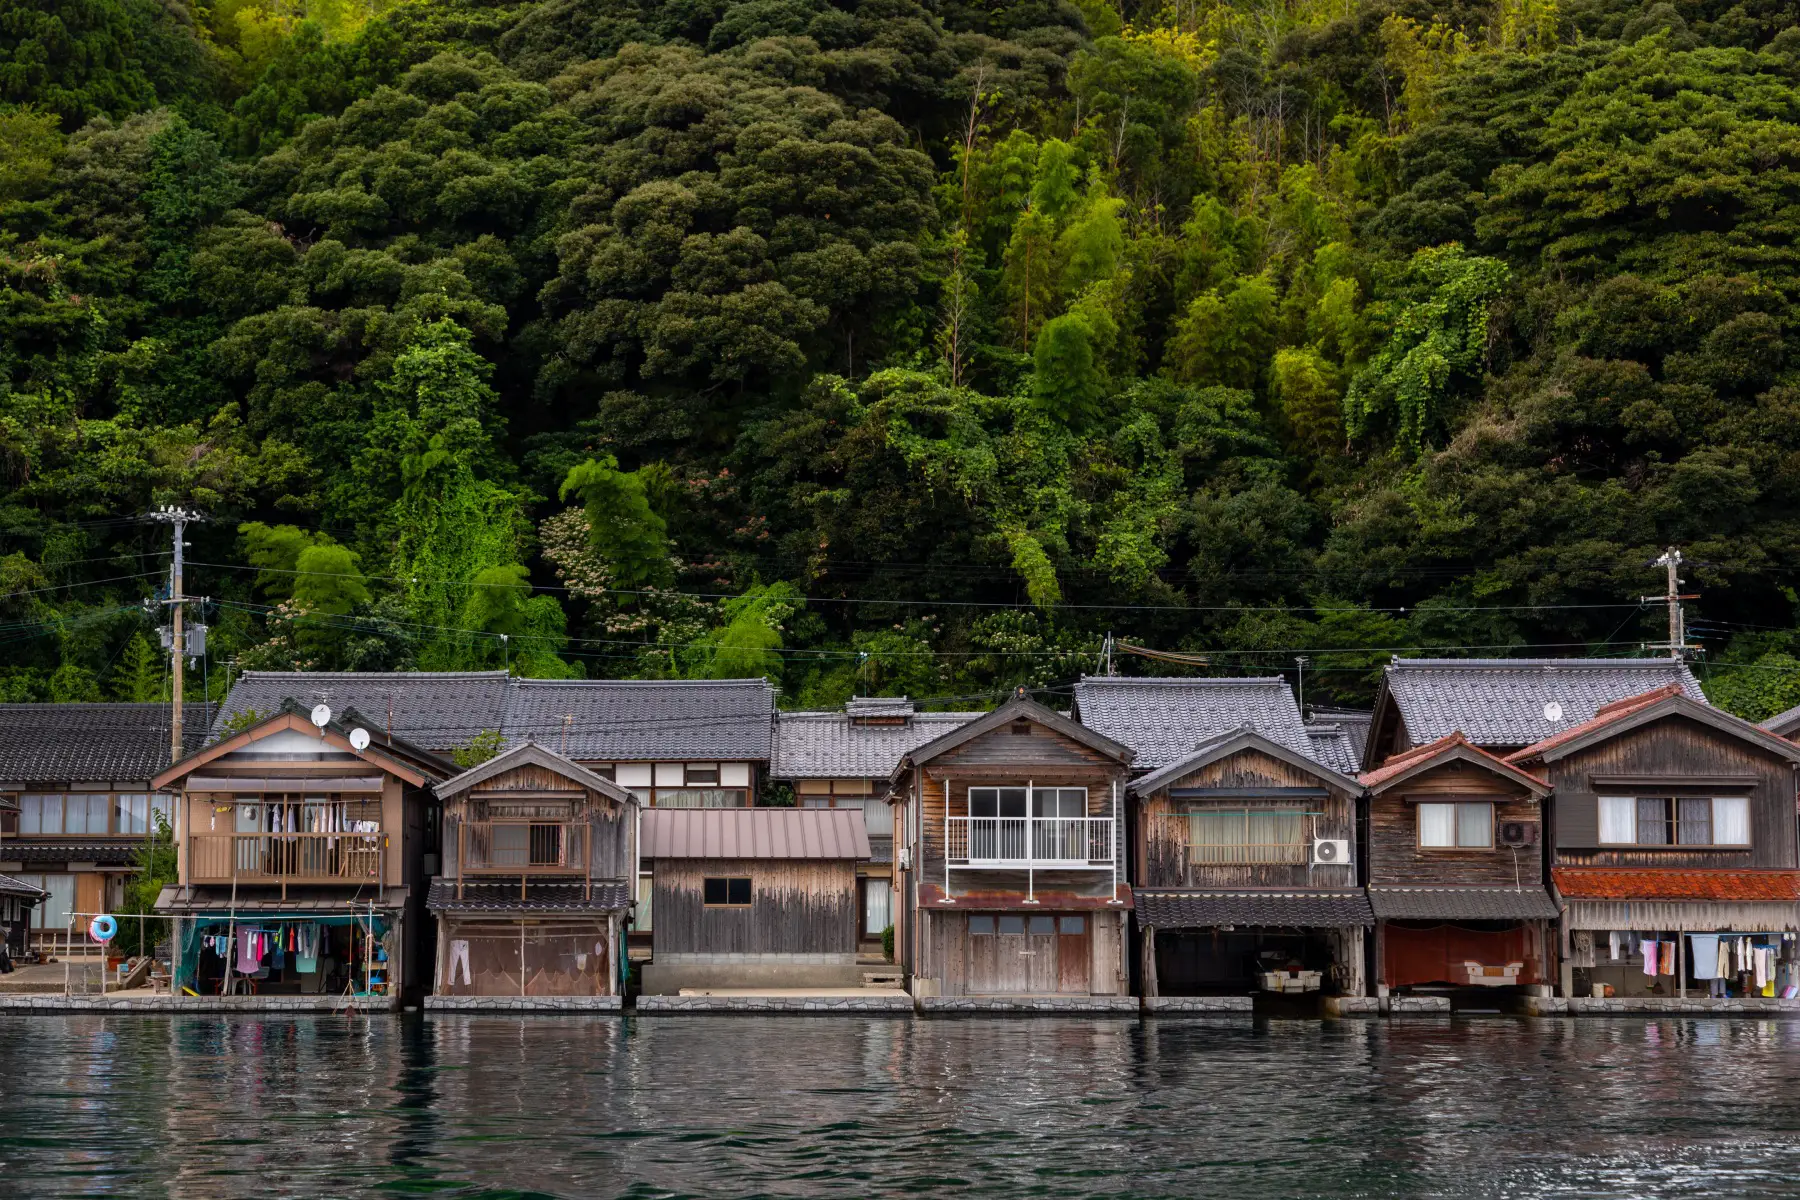 Fisherman houses stand side-by-side in Kyoto